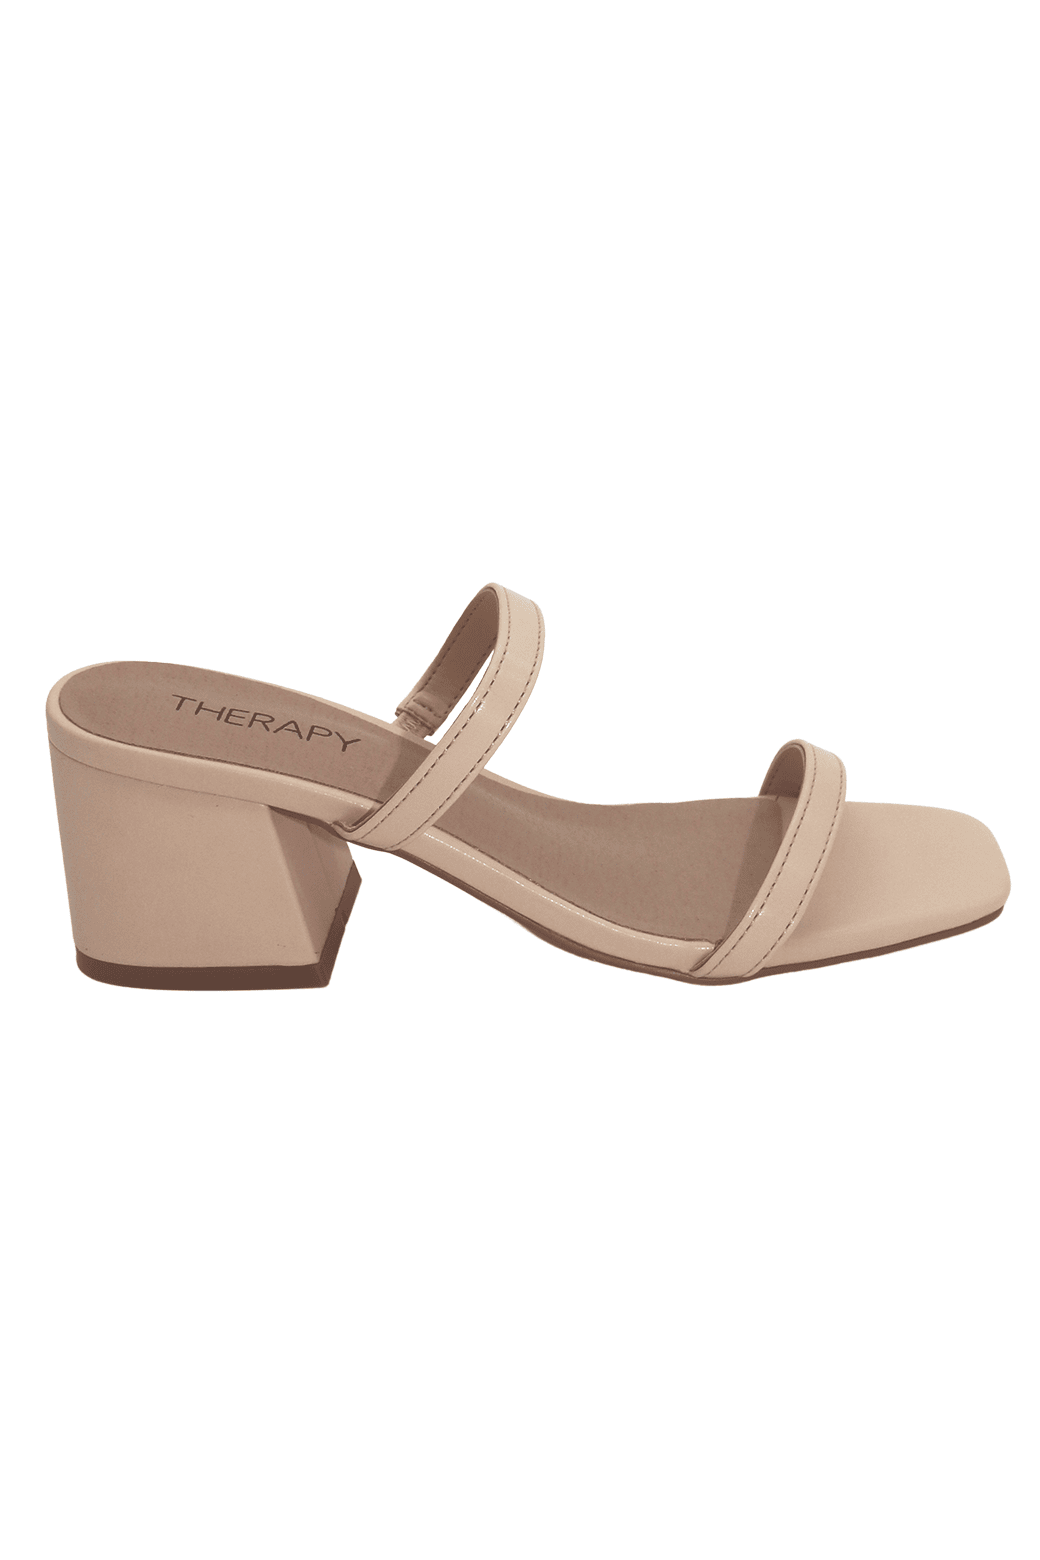 Therapy Goldie Heels Cream